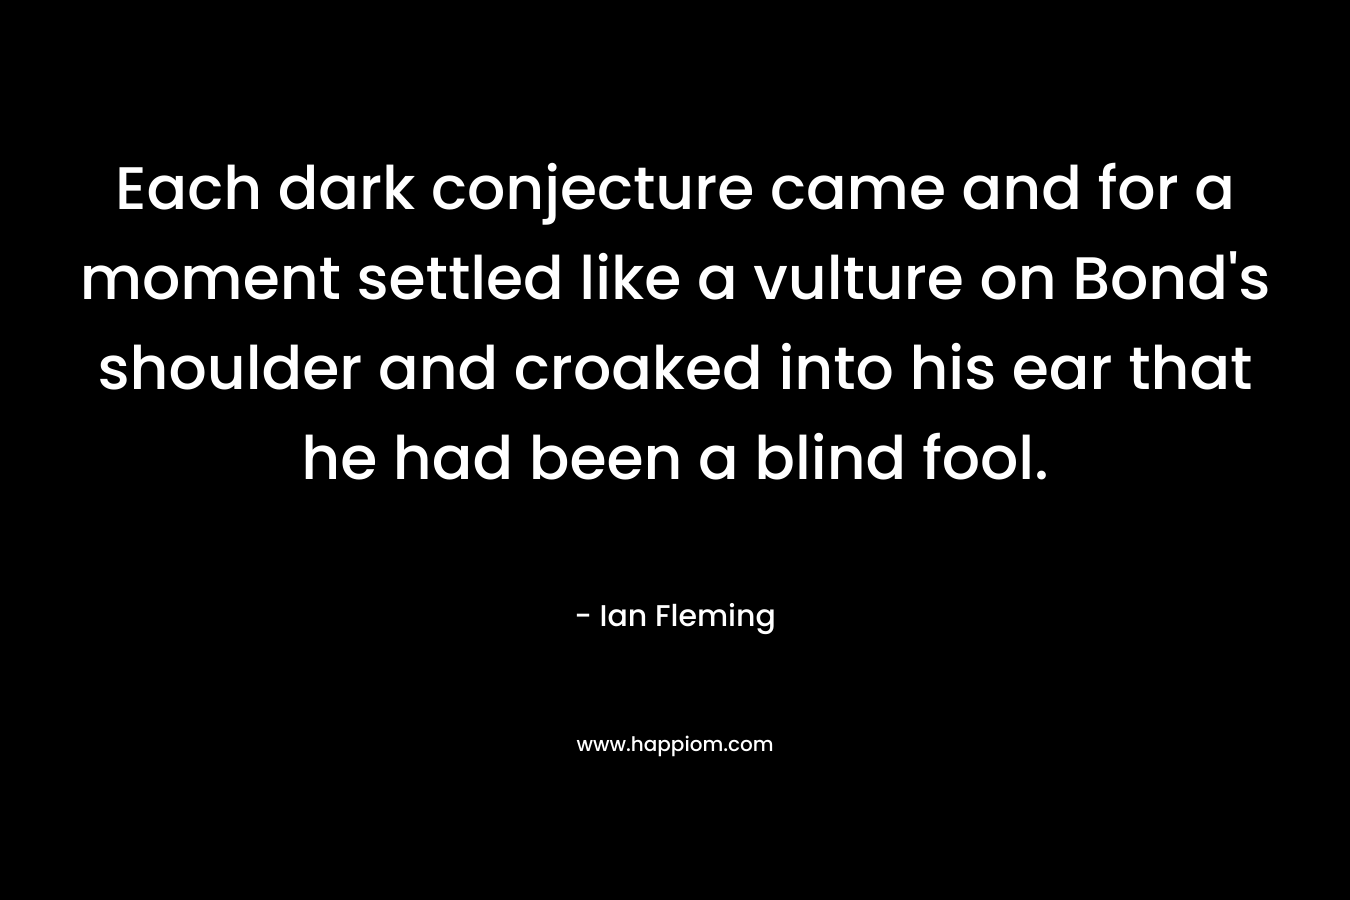 Each dark conjecture came and for a moment settled like a vulture on Bond’s shoulder and croaked into his ear that he had been a blind fool. – Ian Fleming